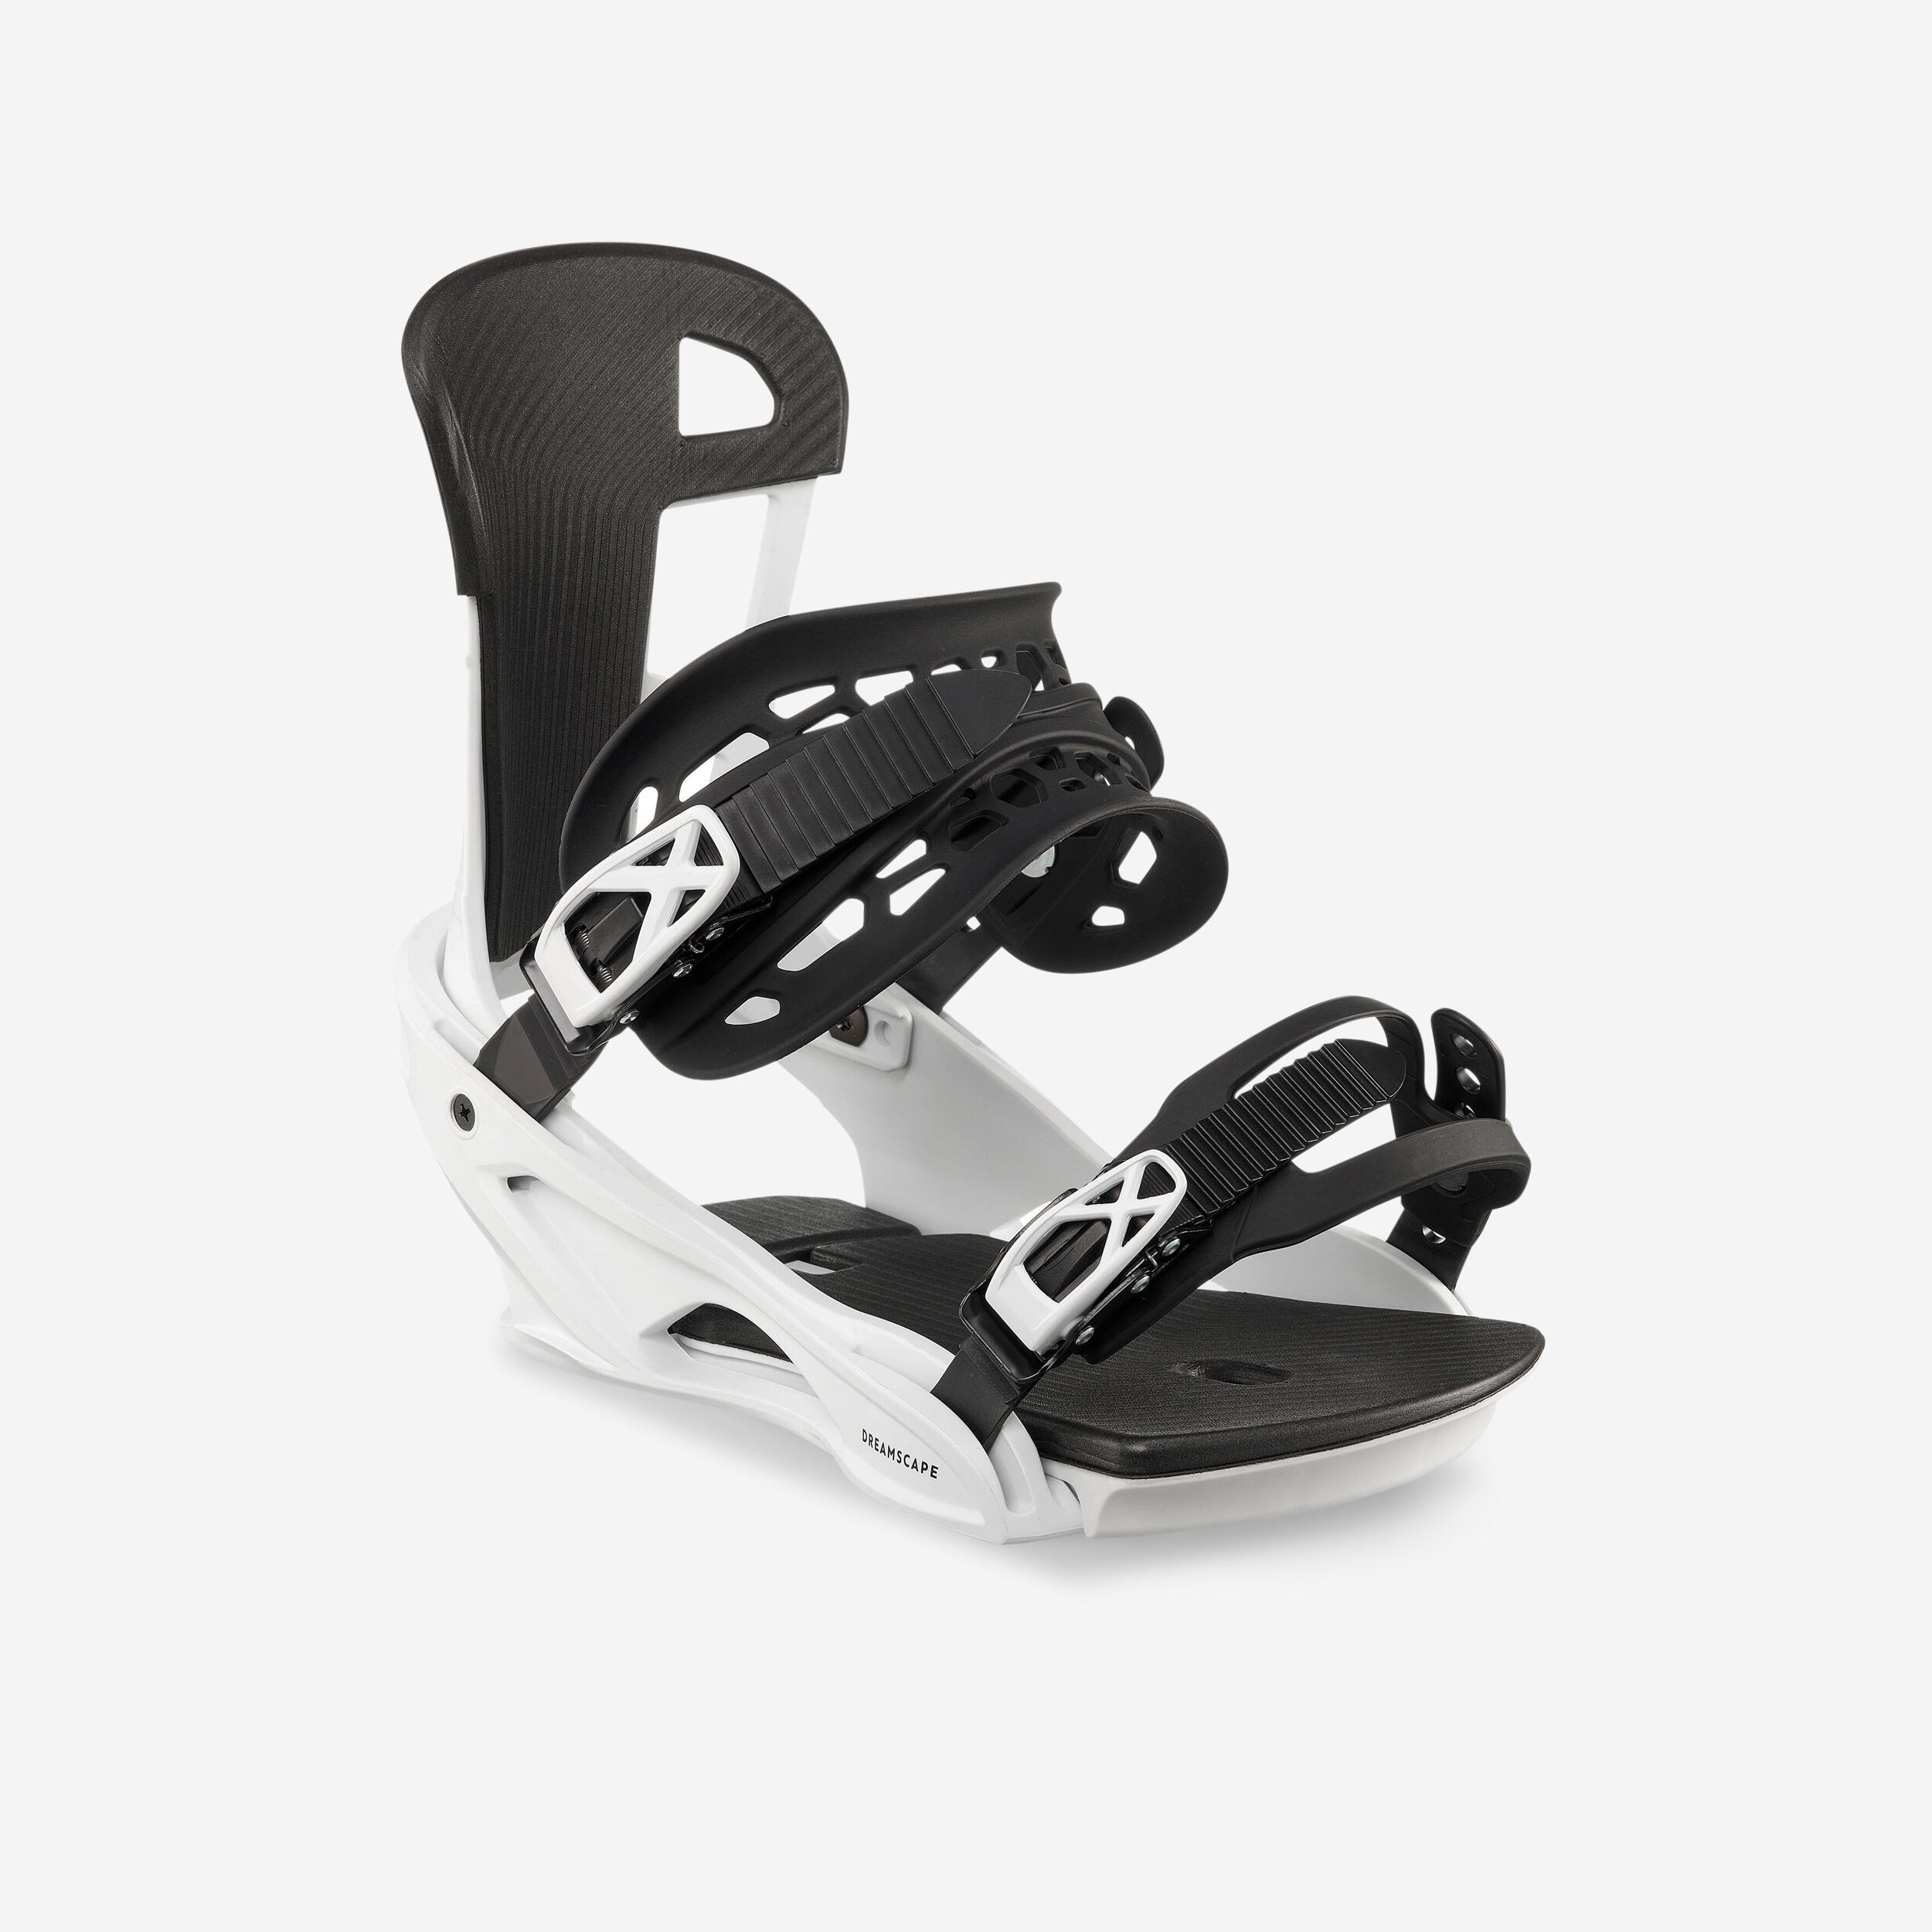 DREAMSCAPE All Mountain/Freestyle Snowboard Bindings - SNB 500 - White